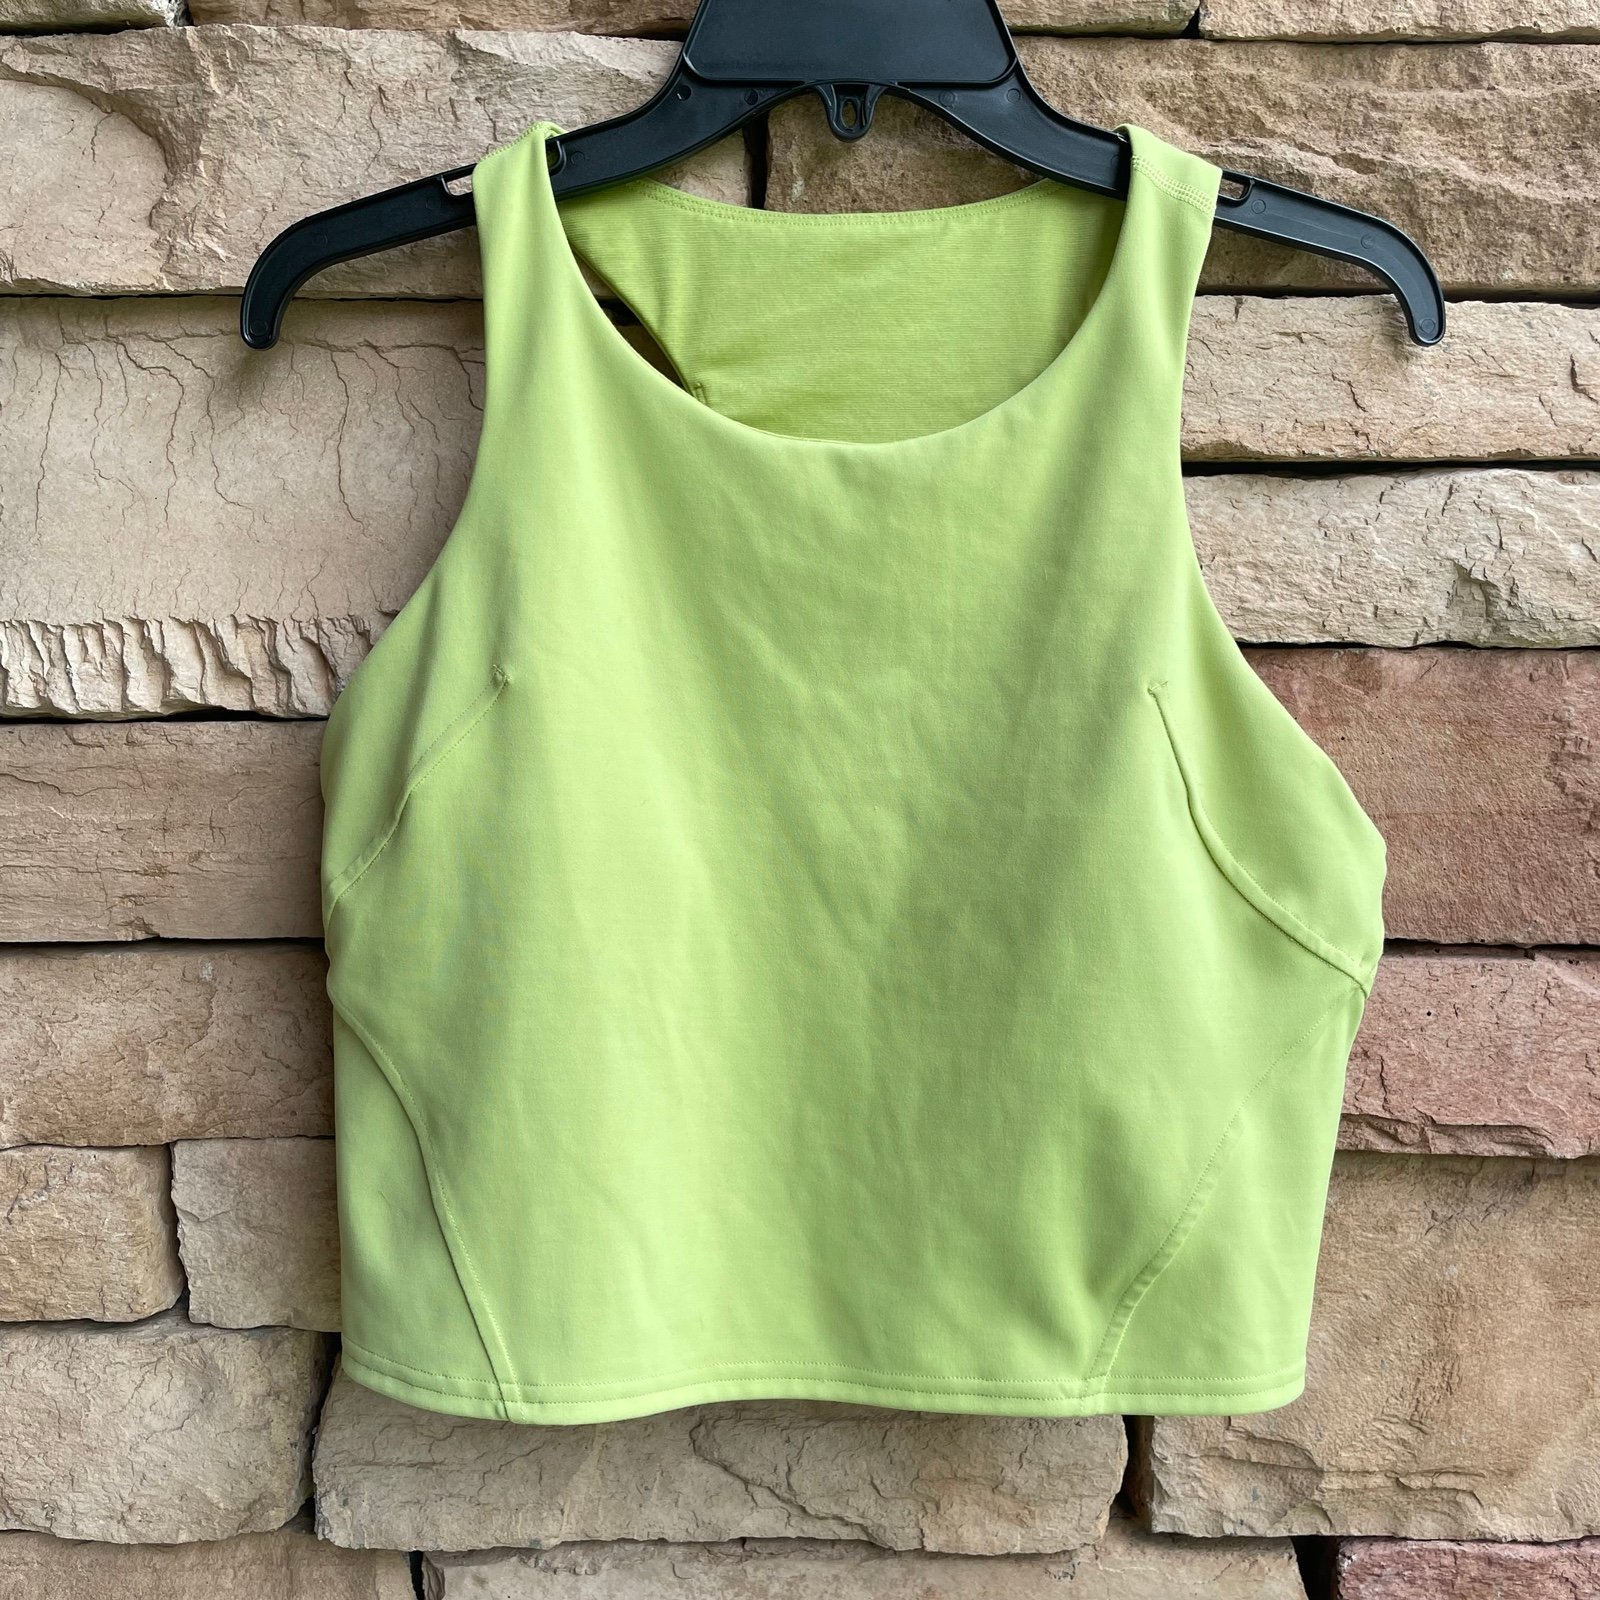 Wholesale price Lululemon yellow lime cropped Align tank top EUC 12 lSURP5J9X on sale